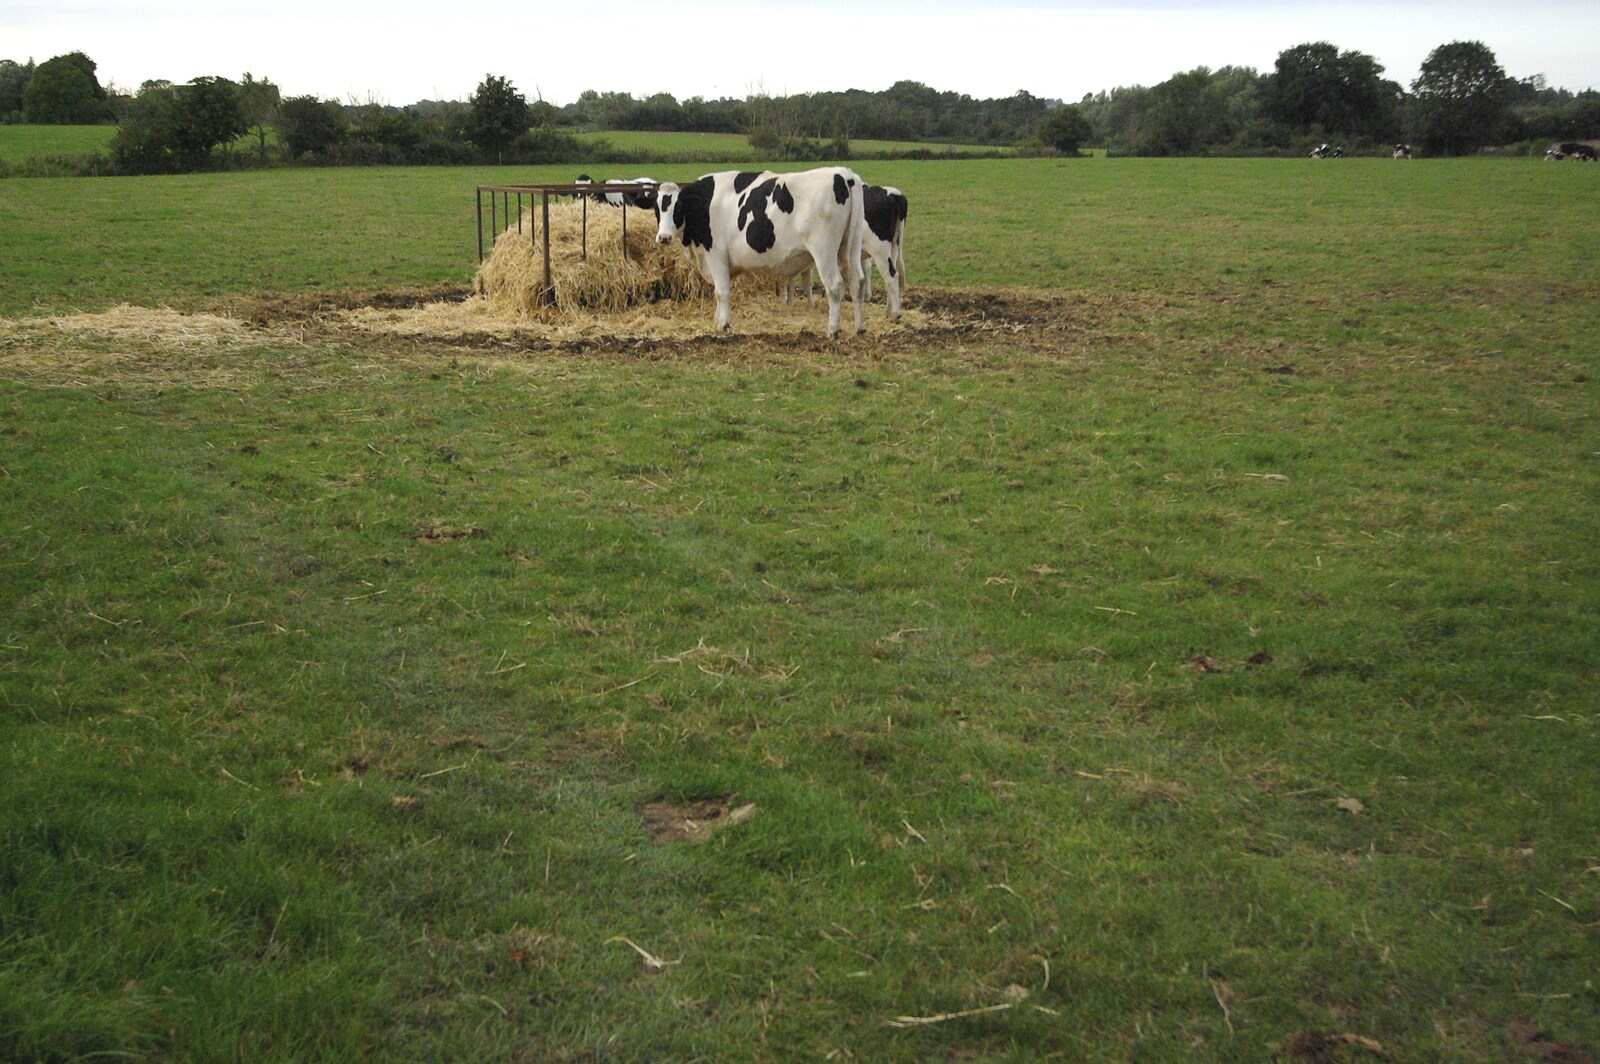 Some cows look over from A Picnic on The Ling, Wortham, Suffolk - 26th August 2007